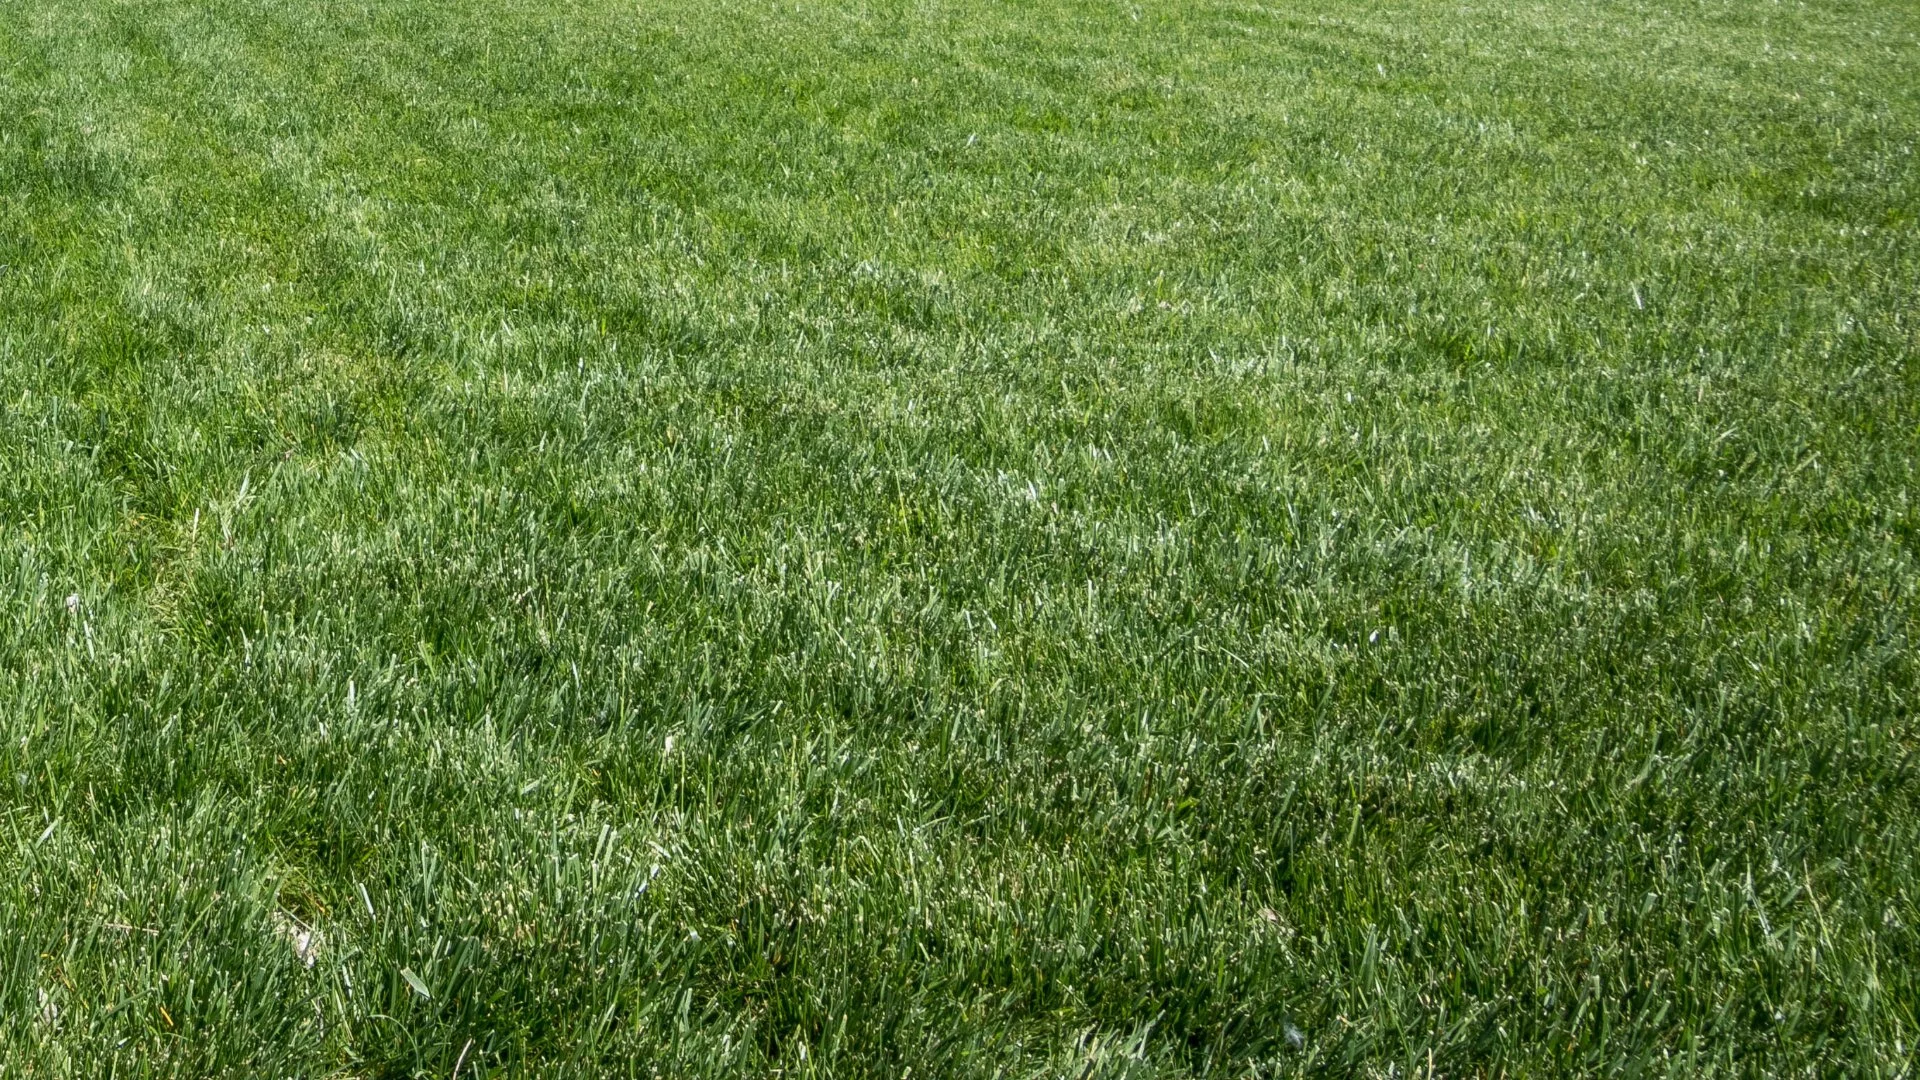 Thick green grass in a front yard in Memphis, TN.